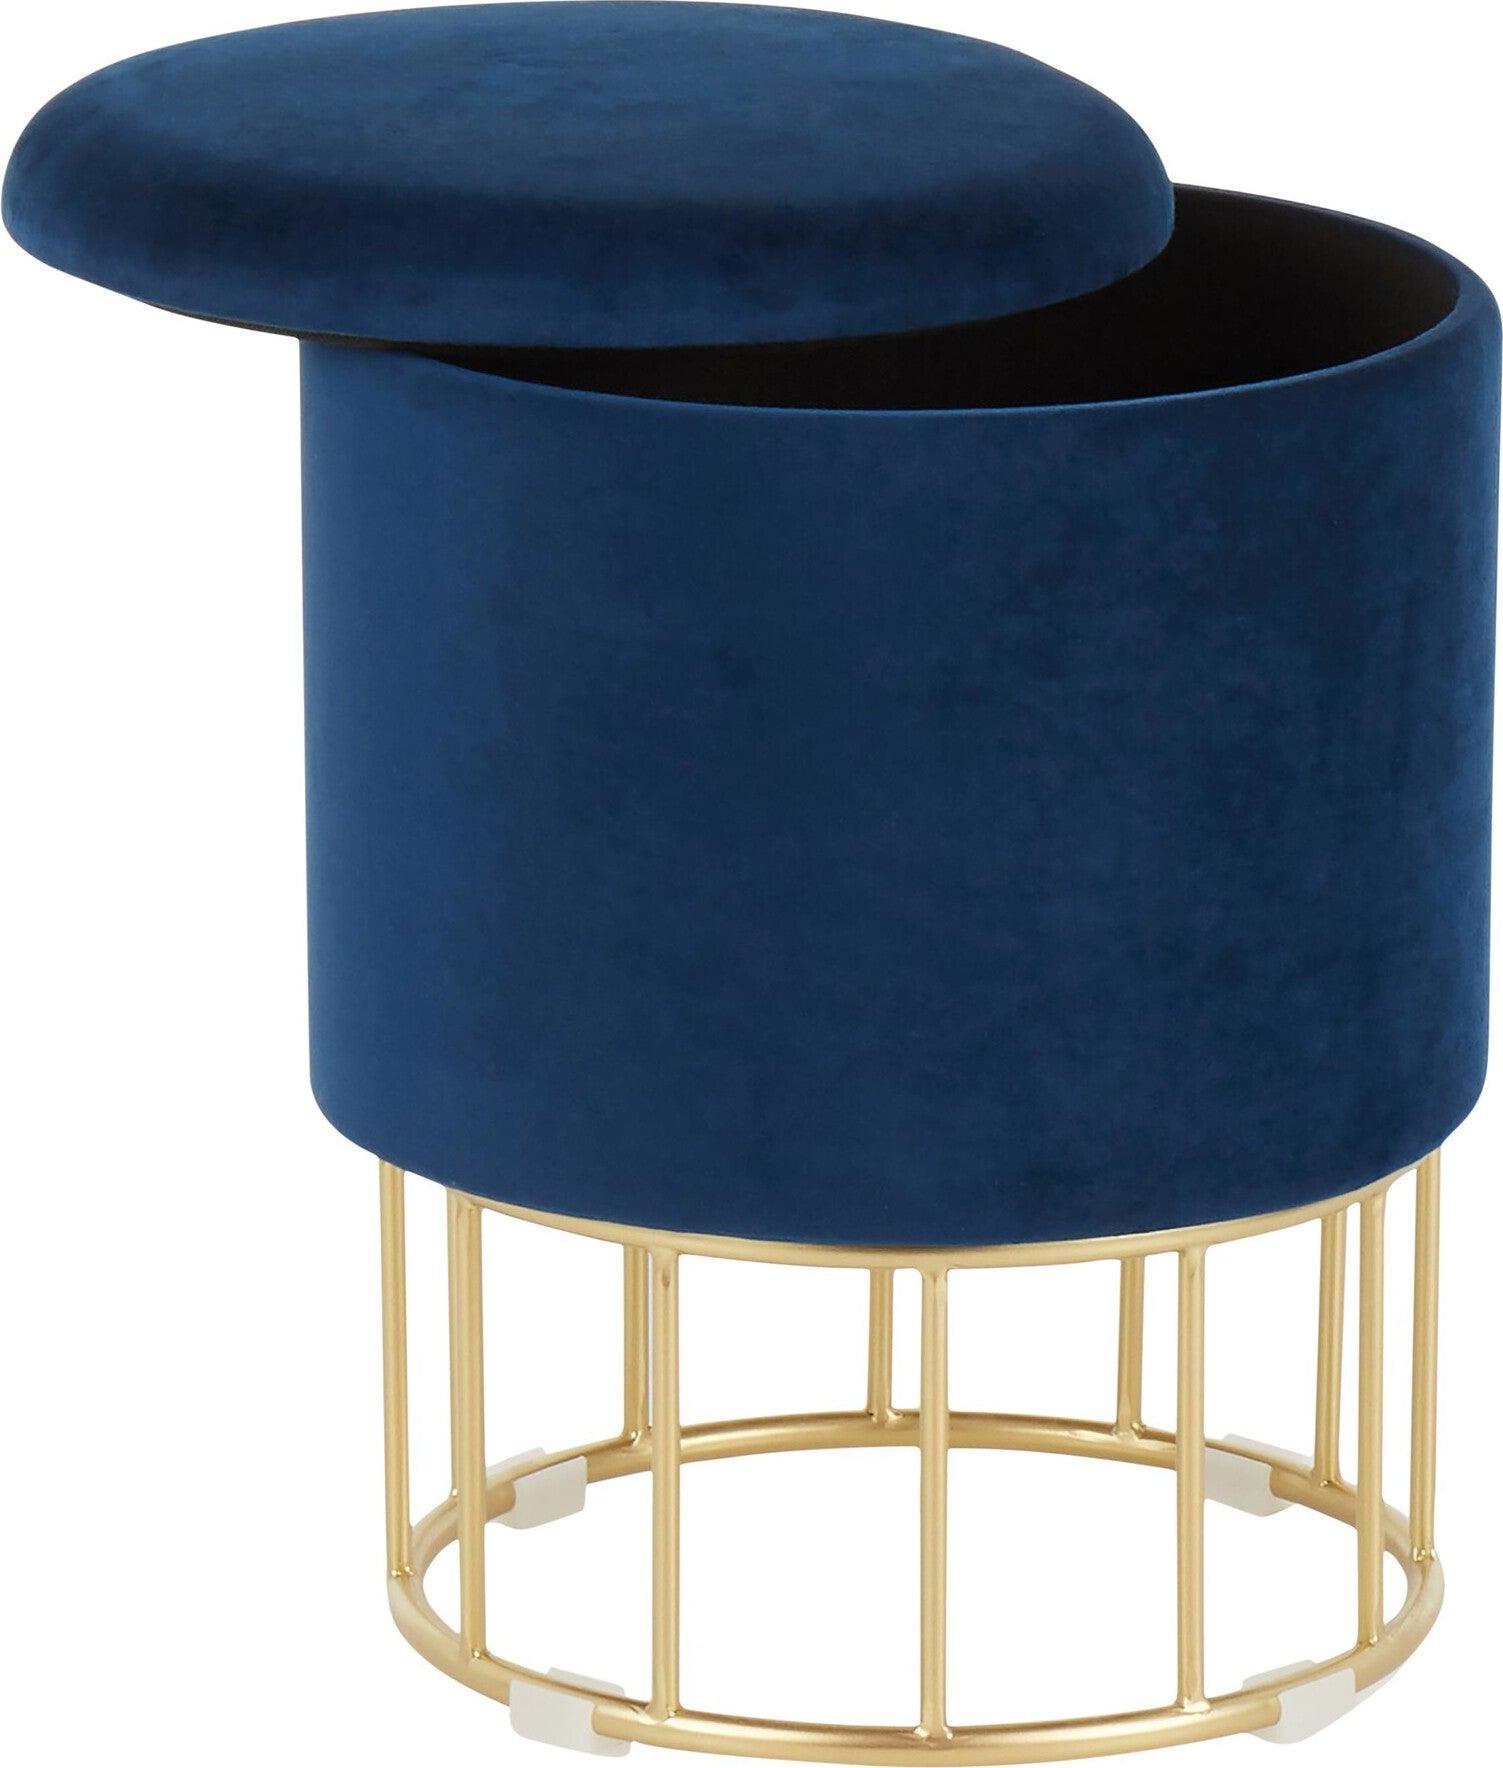 Lumisource Ottomans & Stools - Canary Contemporary Ottoman Gold Metal & Blue Velvet